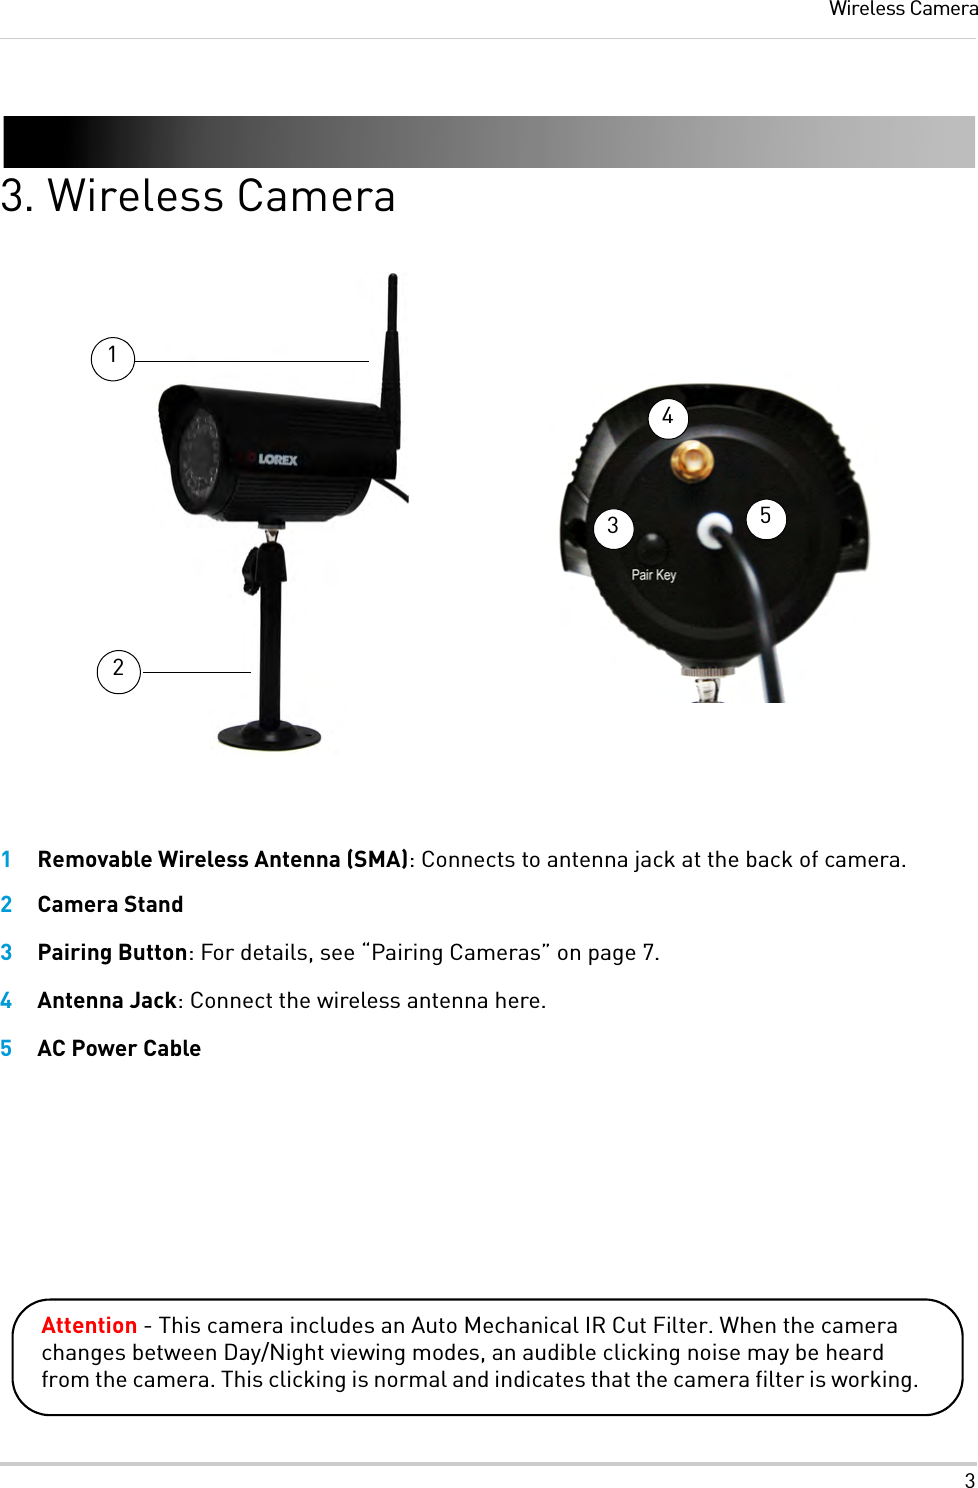 3Wireless Camera3. Wireless Camera132451Removable Wireless Antenna (SMA): Connects to antenna jack at the back of camera.2Camera Stand3Pairing Button: For details, see “Pairing Cameras” on page 7.4Antenna Jack: Connect the wireless antenna here.5AC Power CableAttention - This camera includes an Auto Mechanical IR Cut Filter. When the camera changes between Day/Night viewing modes, an audible clicking noise may be heard from the camera. This clicking is normal and indicates that the camera filter is working.